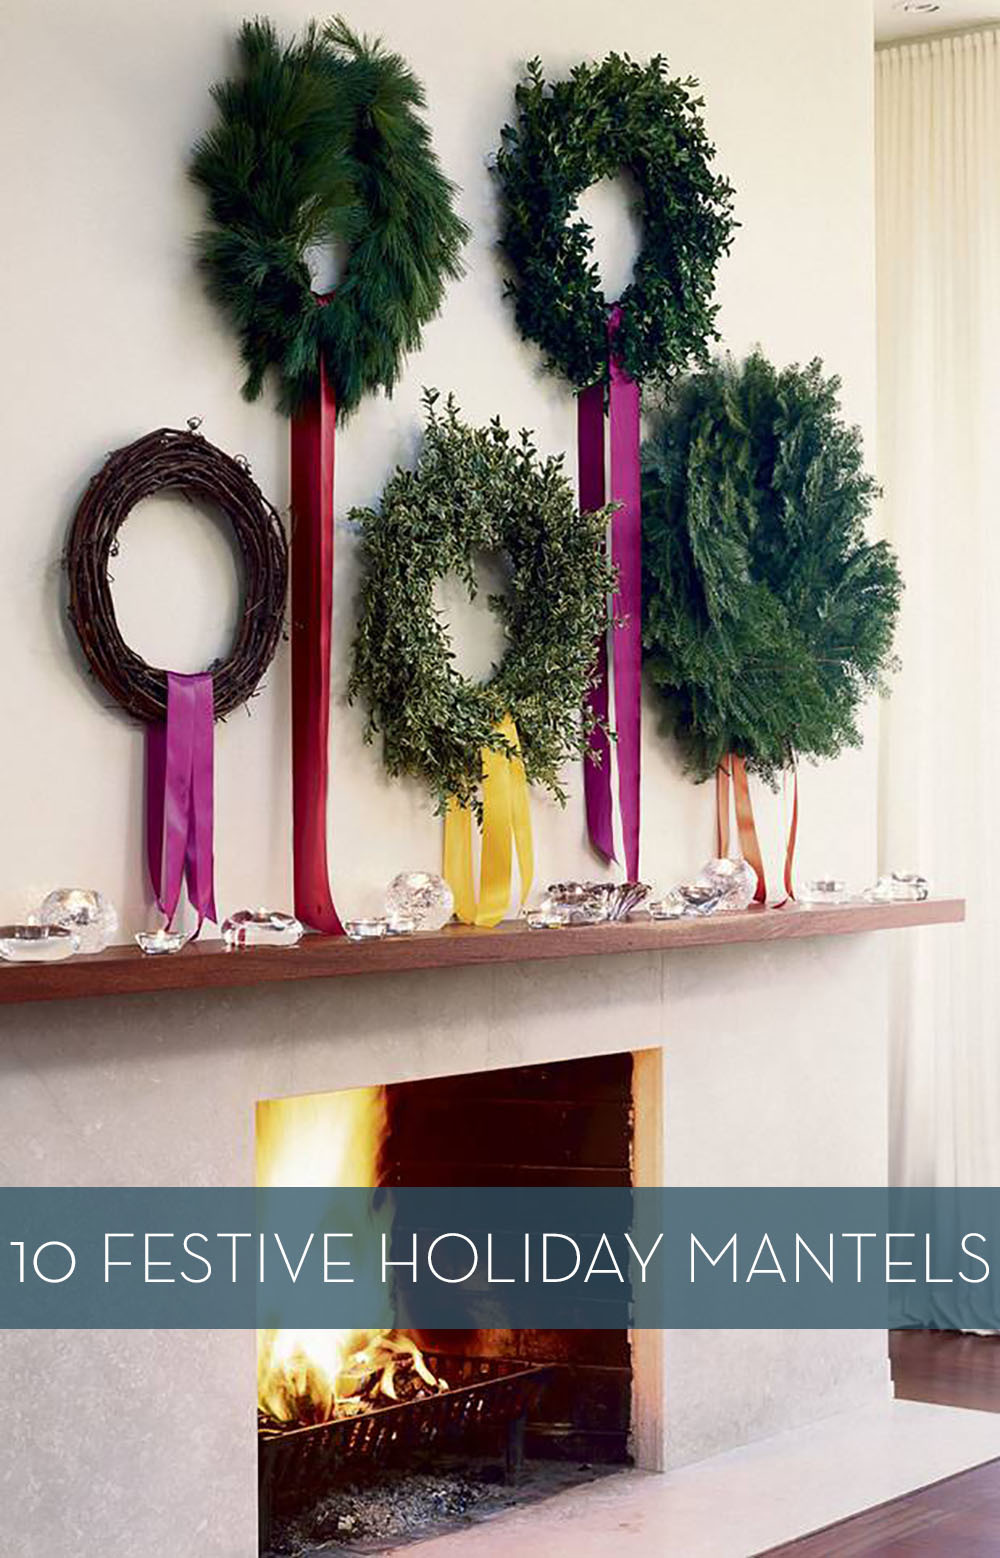 White fireplace with five various wreaths above the mantel.